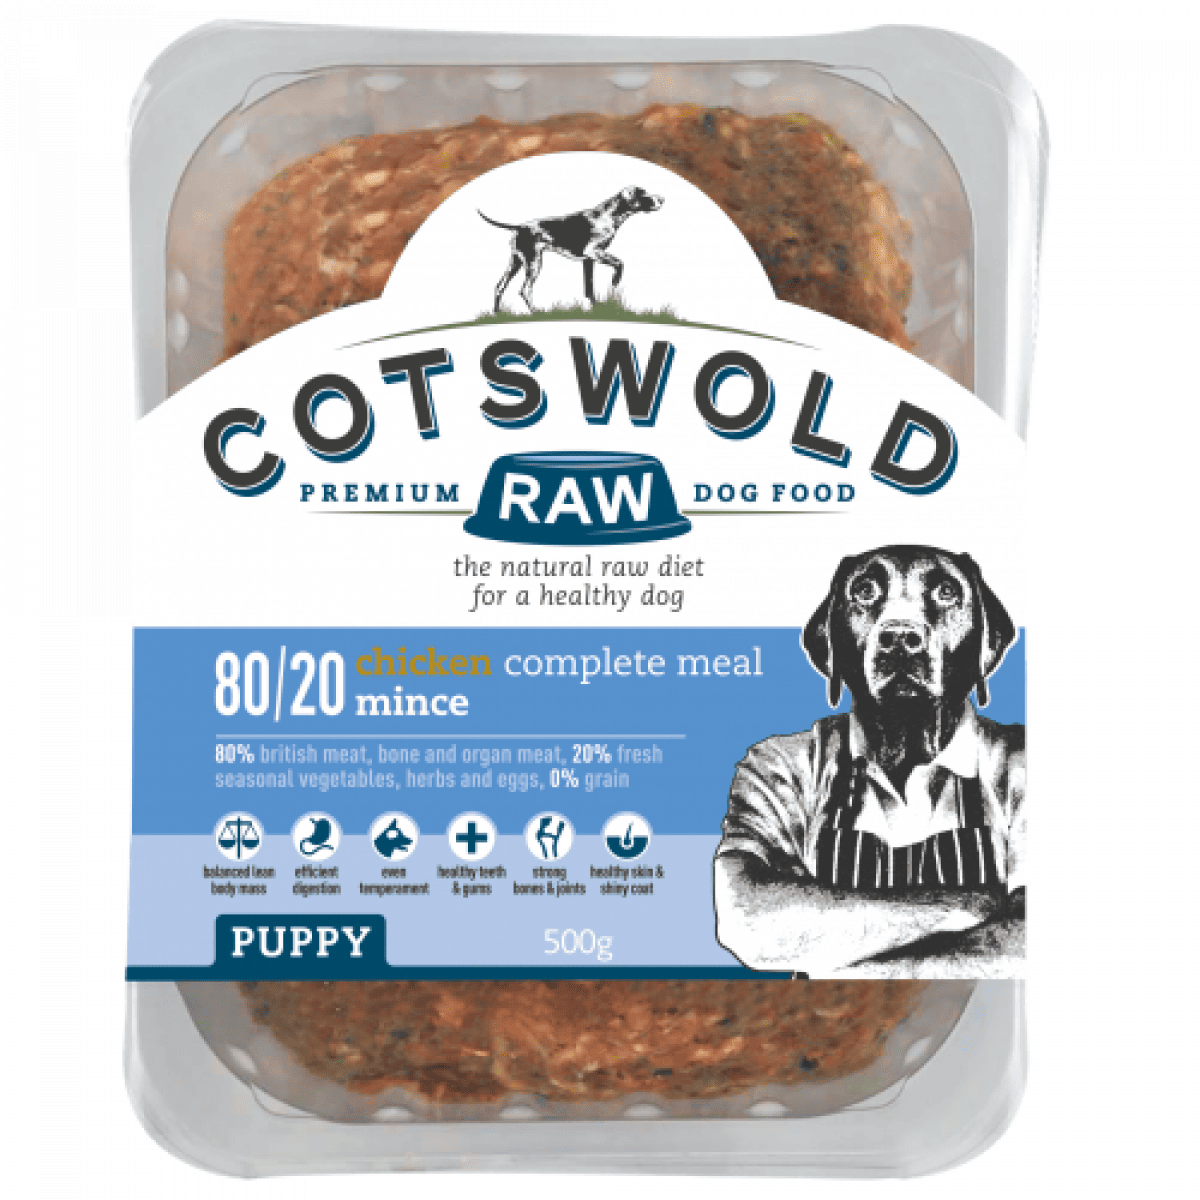 Cotswold Puppy Mince Chicken 500g Main Image